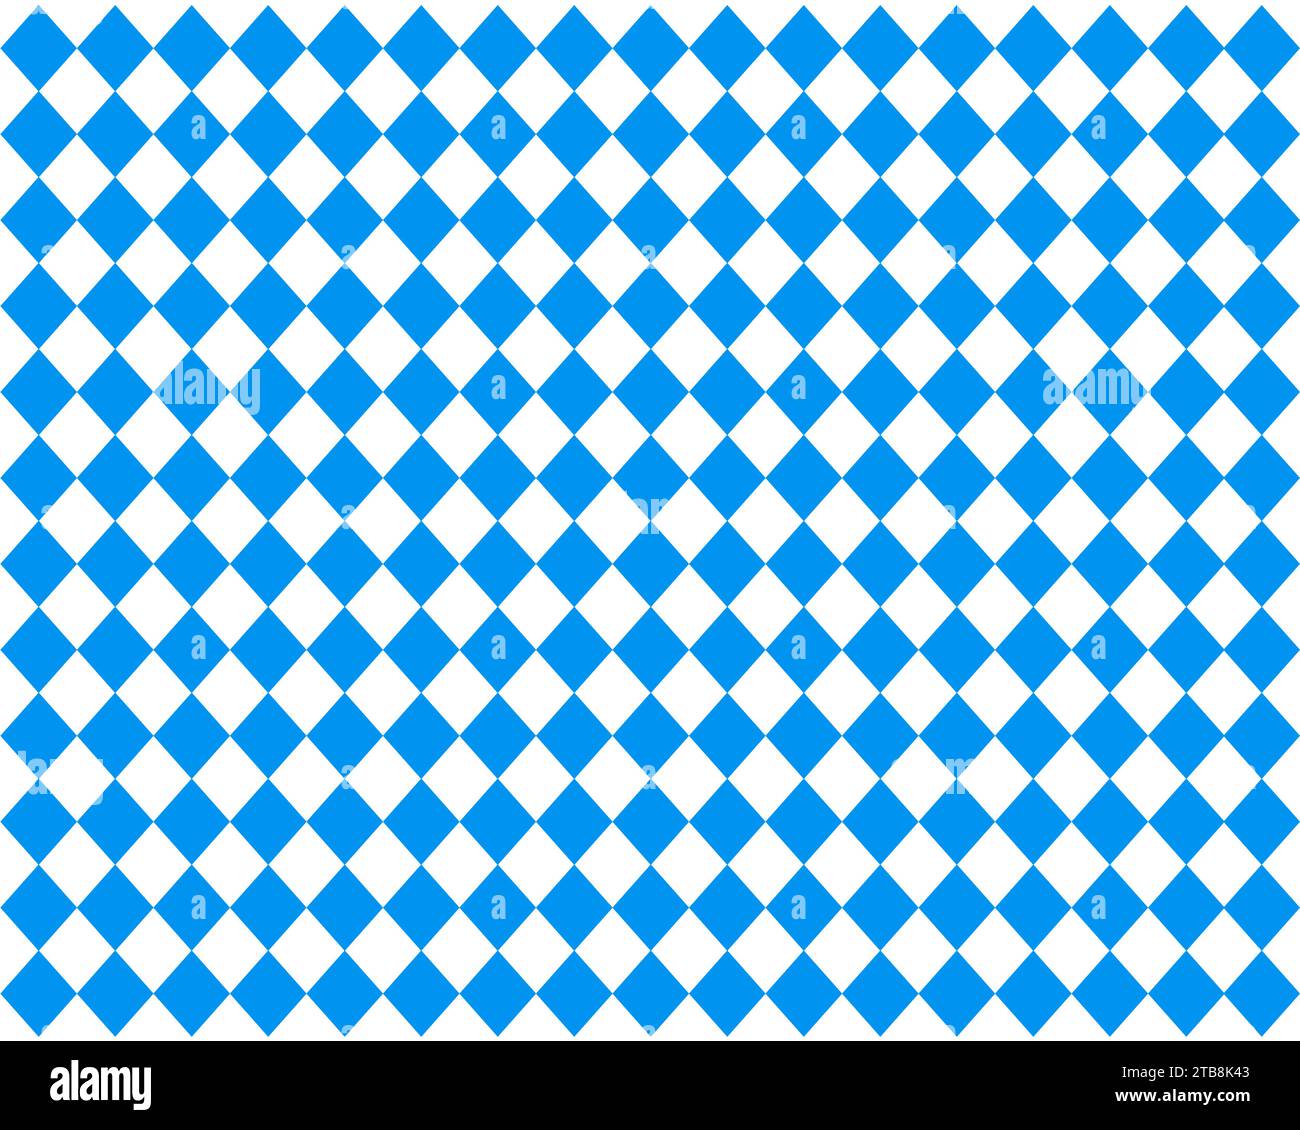 Blue and white seamless Diamond pattern background Stock Vector